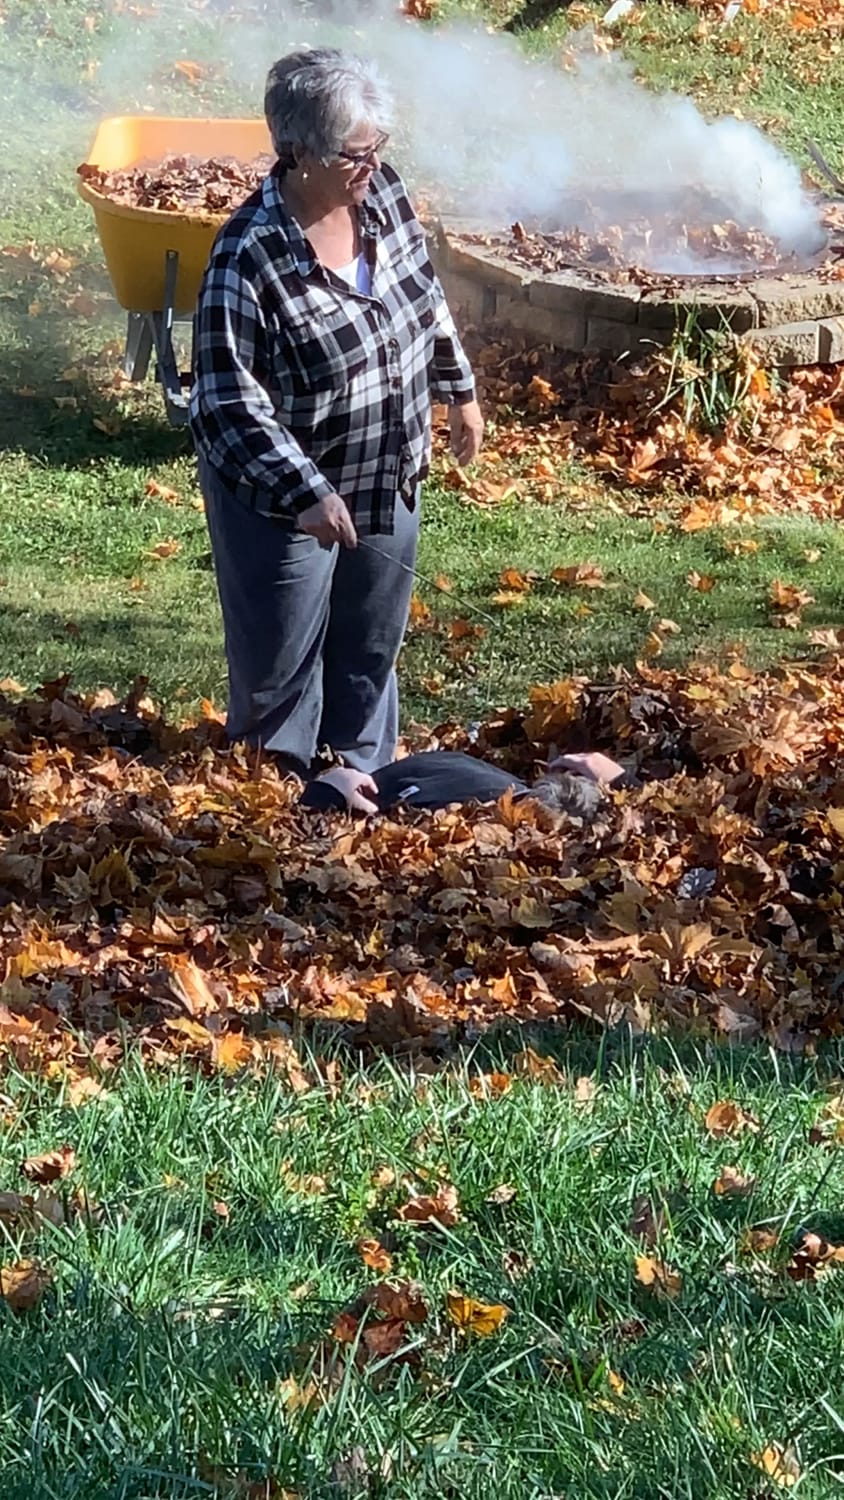 My silly parents playing in a leaf pile.